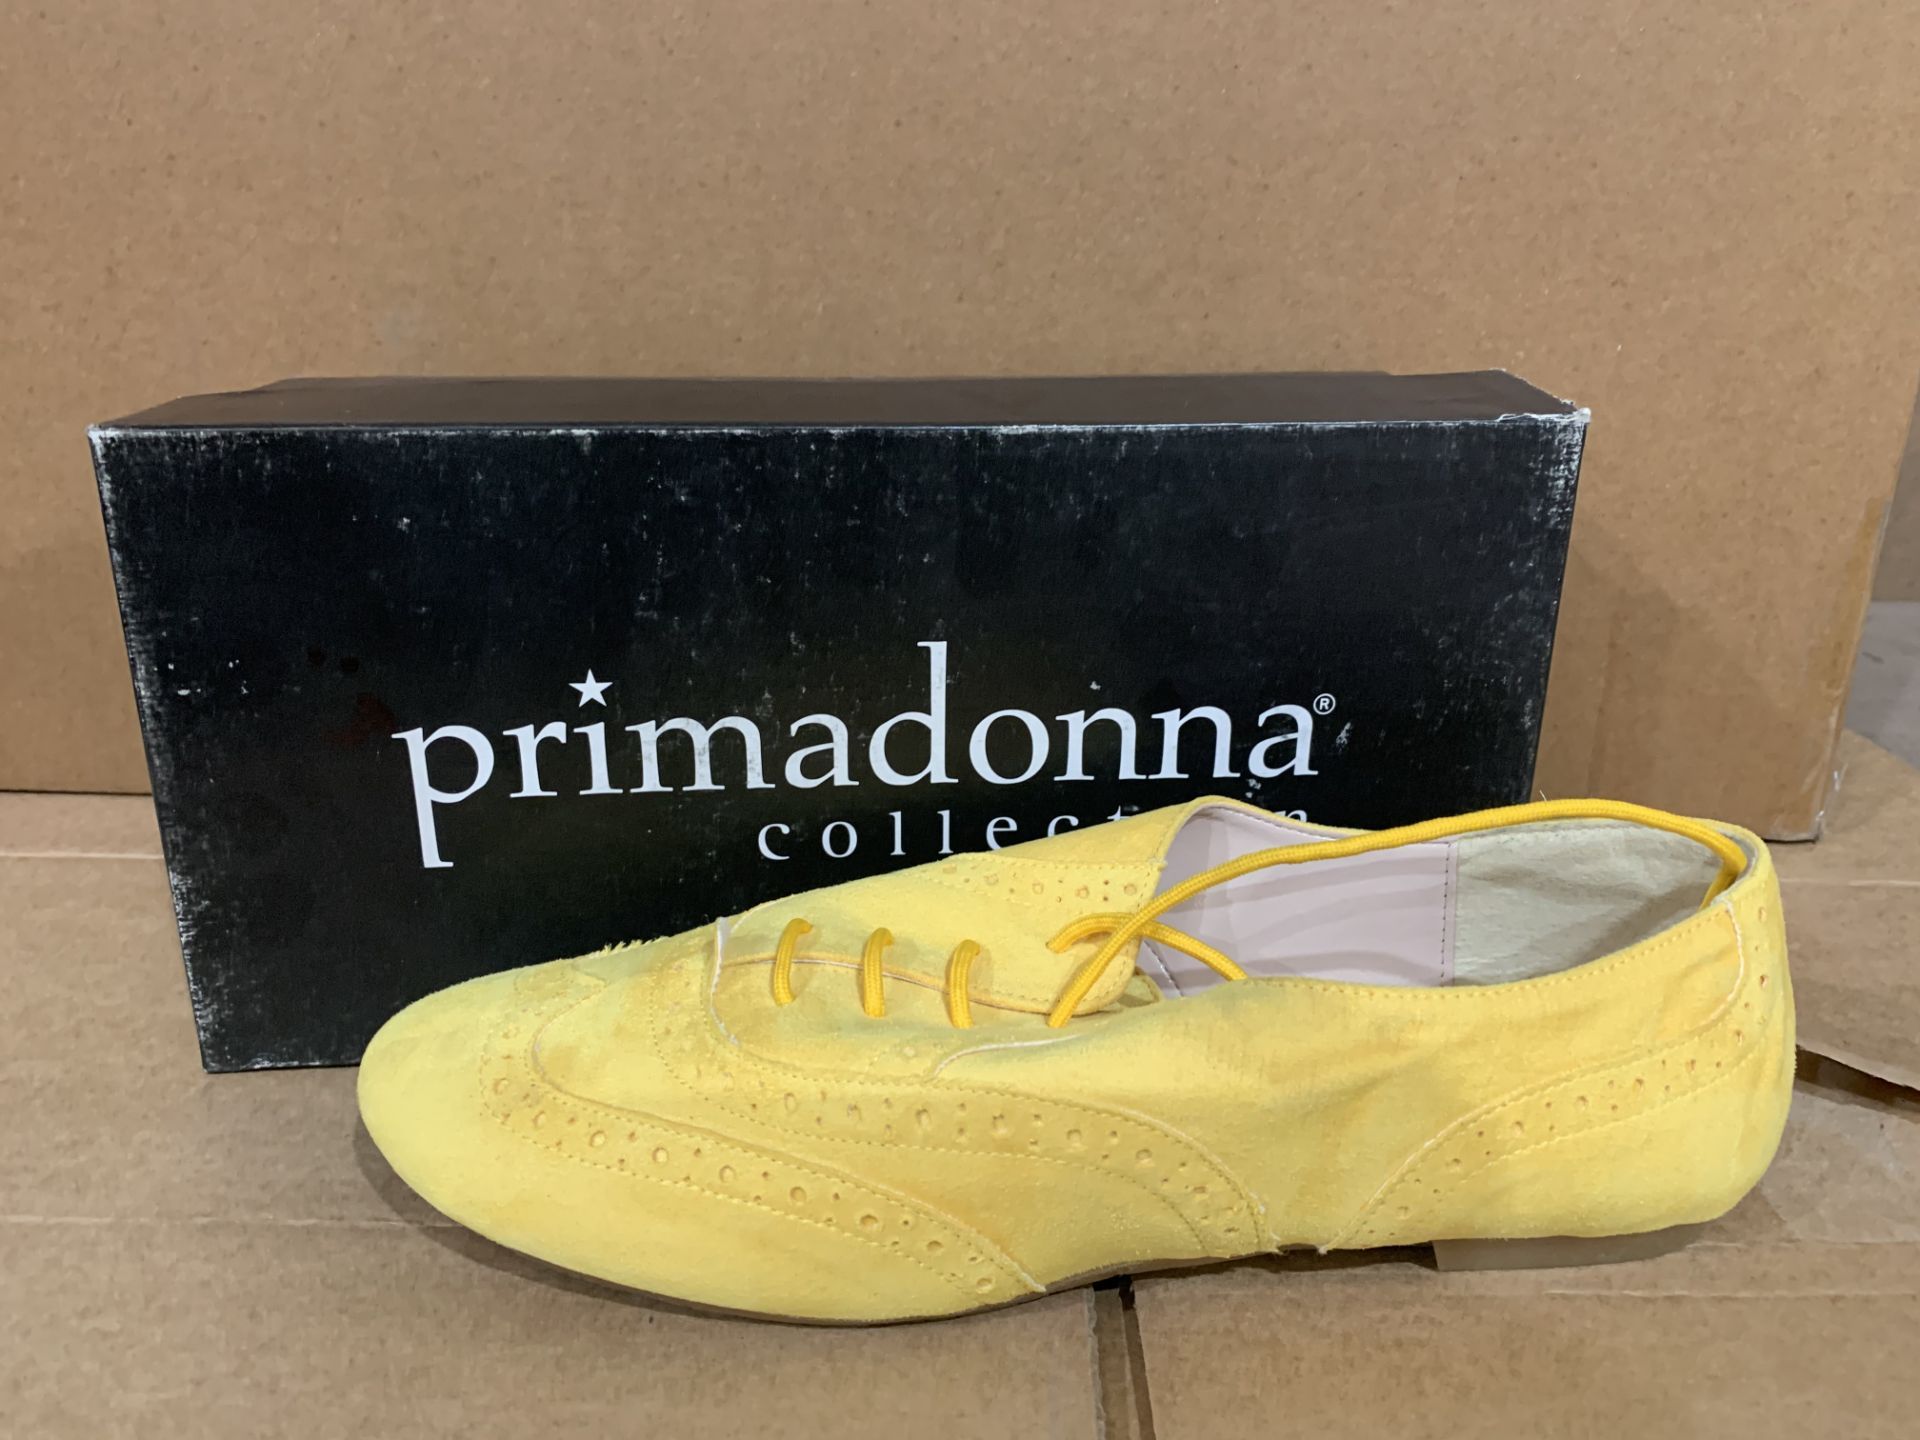 8 X BRAND NEW PRIMADONNA COLLECTION FRAN MICROFIBRA SHOES VARIOUS SIZES (879/20)